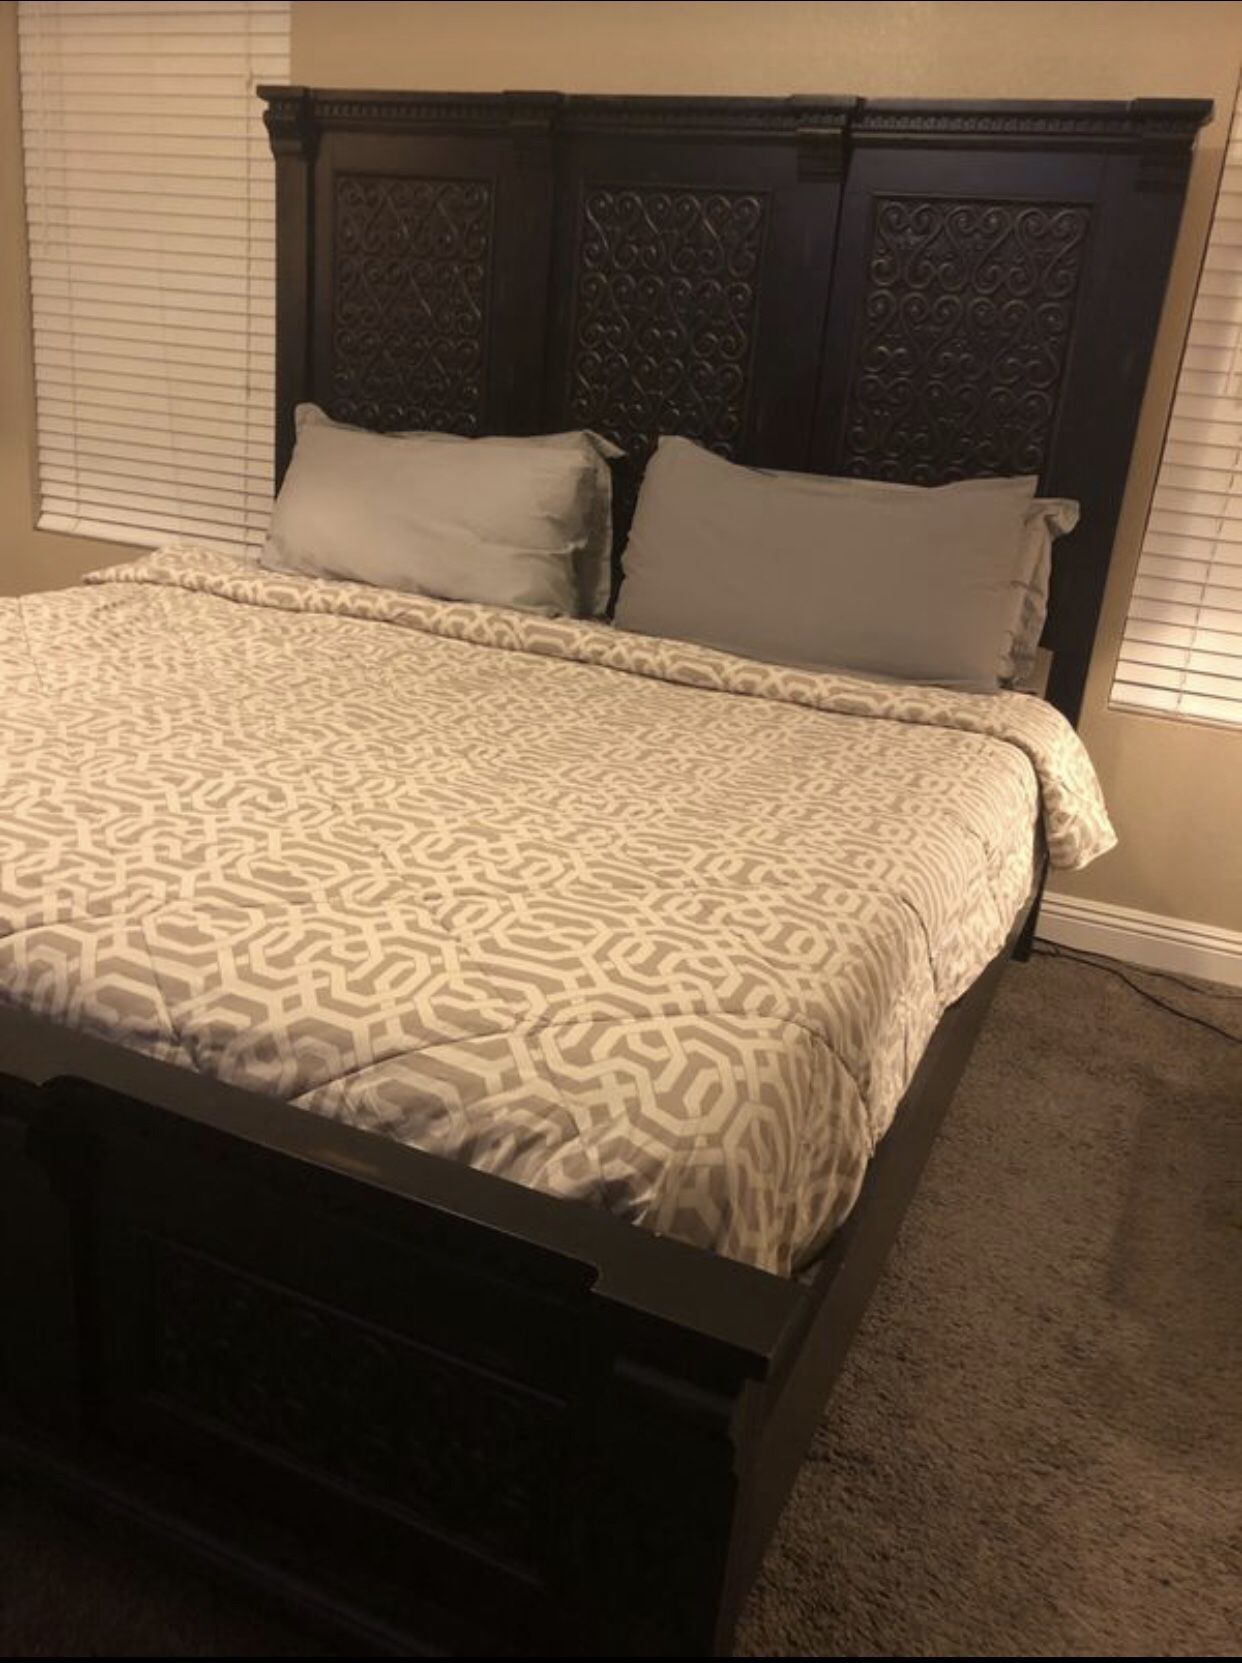 King Size Headboard & Frame Set with 9-Drawer Dresser. Amazing condition—$500 OBO—send your best reasonable offer and let’s discuss!